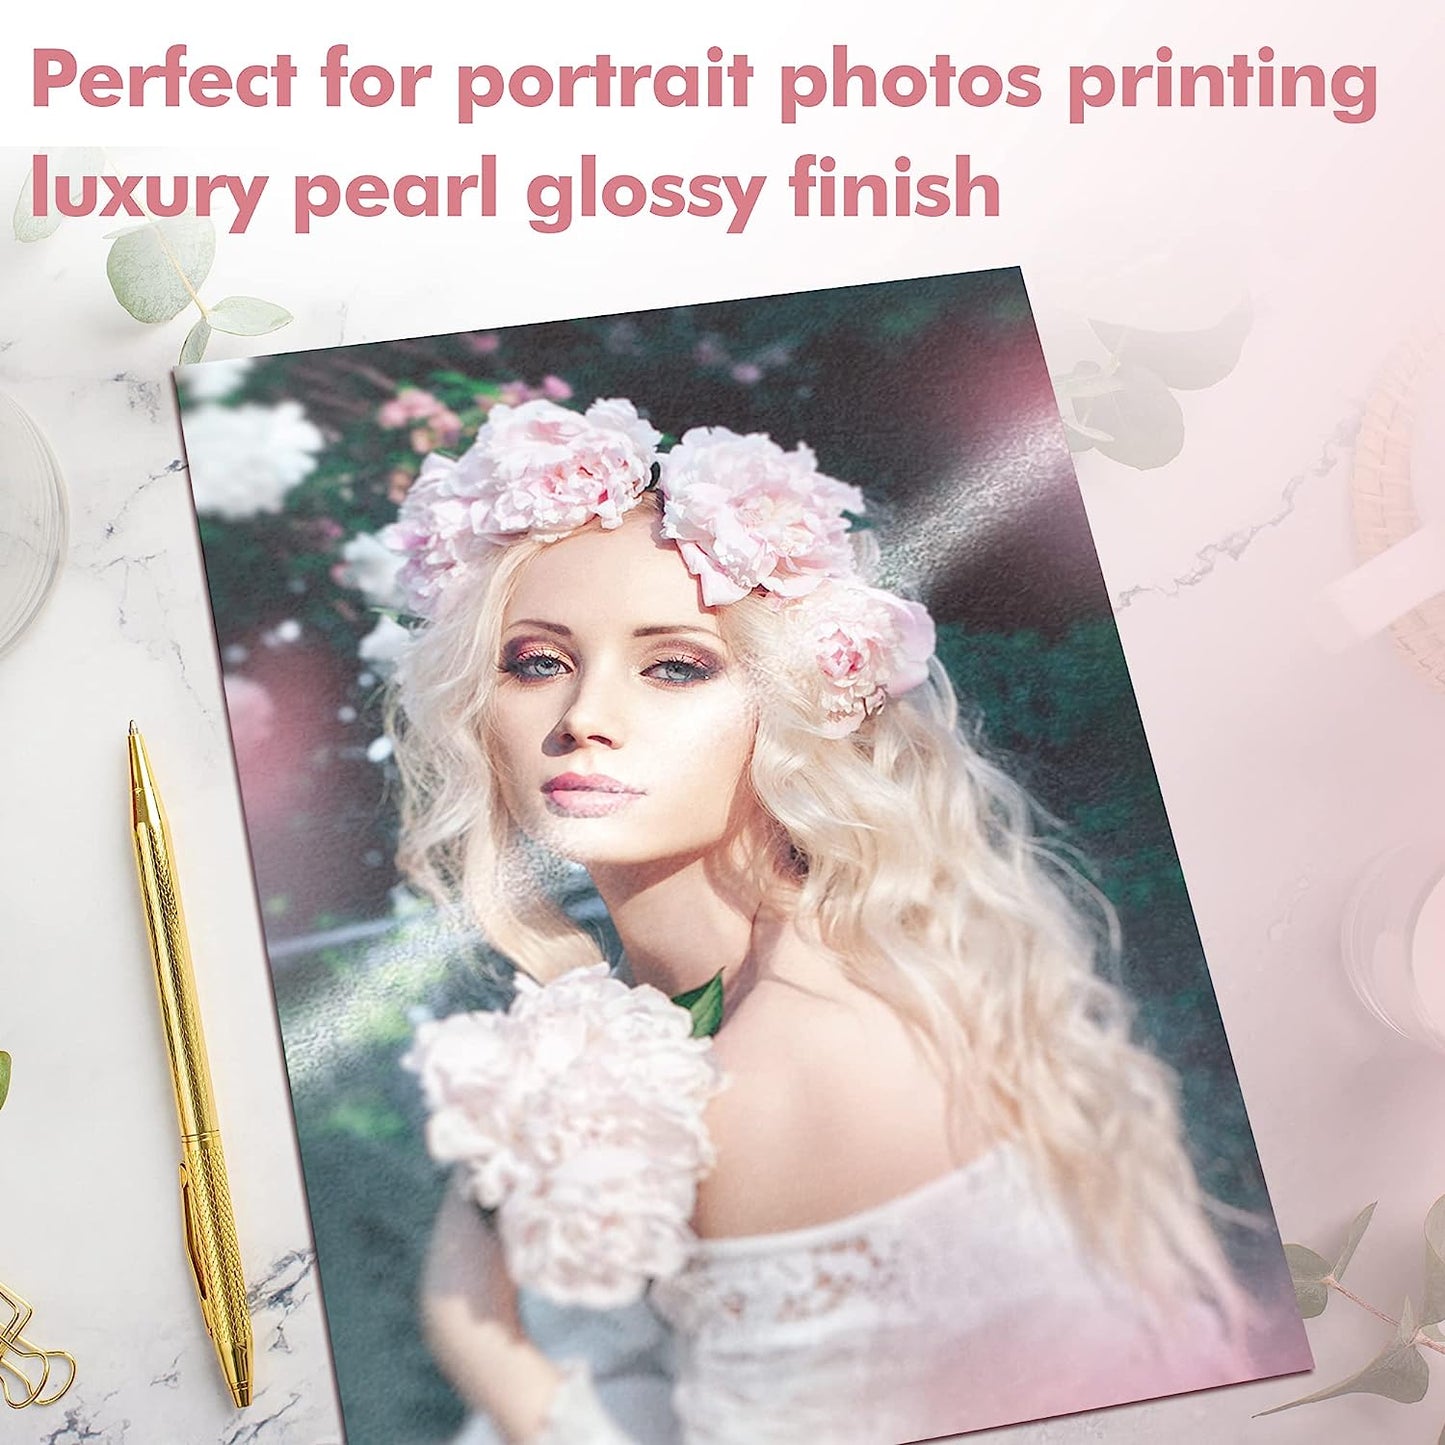 Koala Pearl Glossy Inkjet Photo Paper 8.5X11 Inches 30 Sheets for Inkjet and Laser Printer Use DYE INK 48lb 180gsm